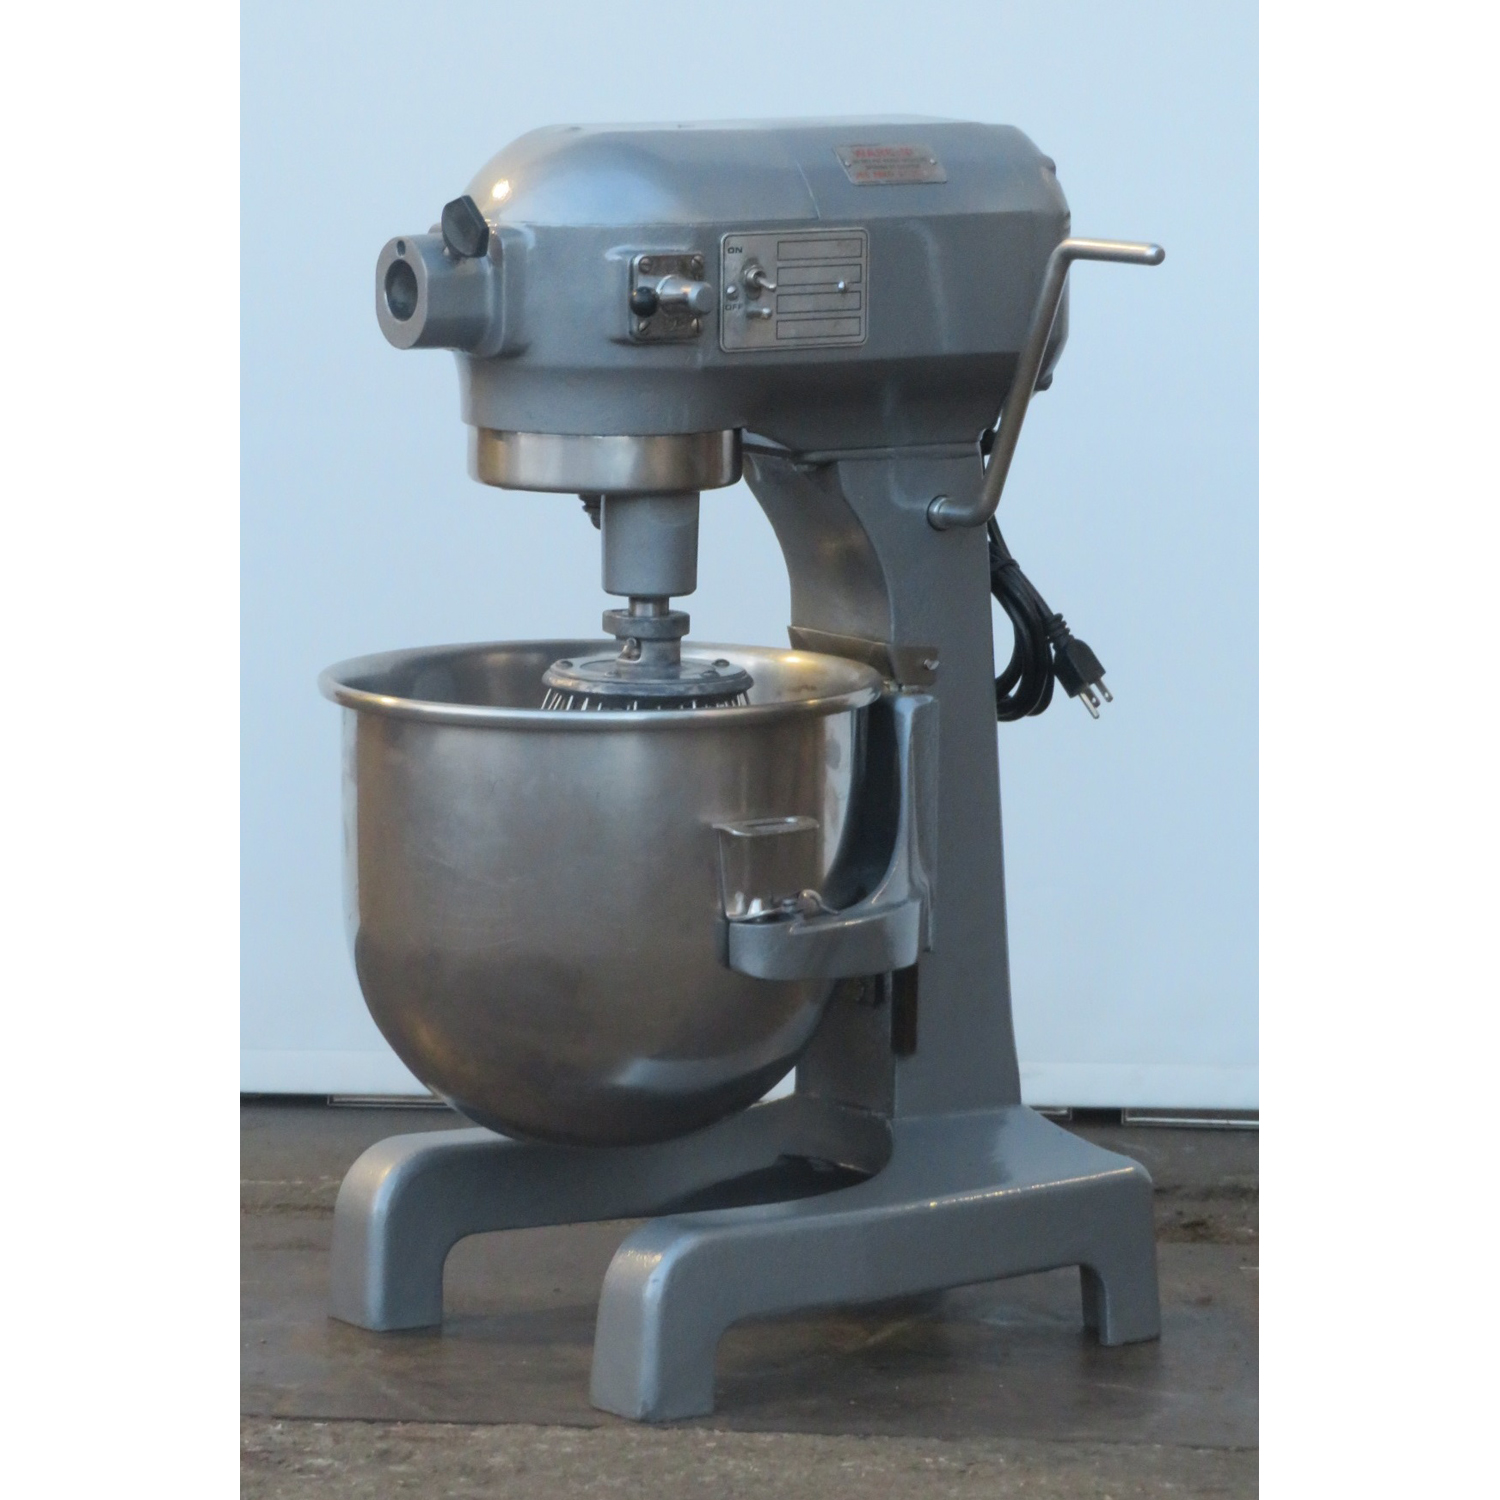 Hobart 20 Quart Mixer A200, Used Great Condition